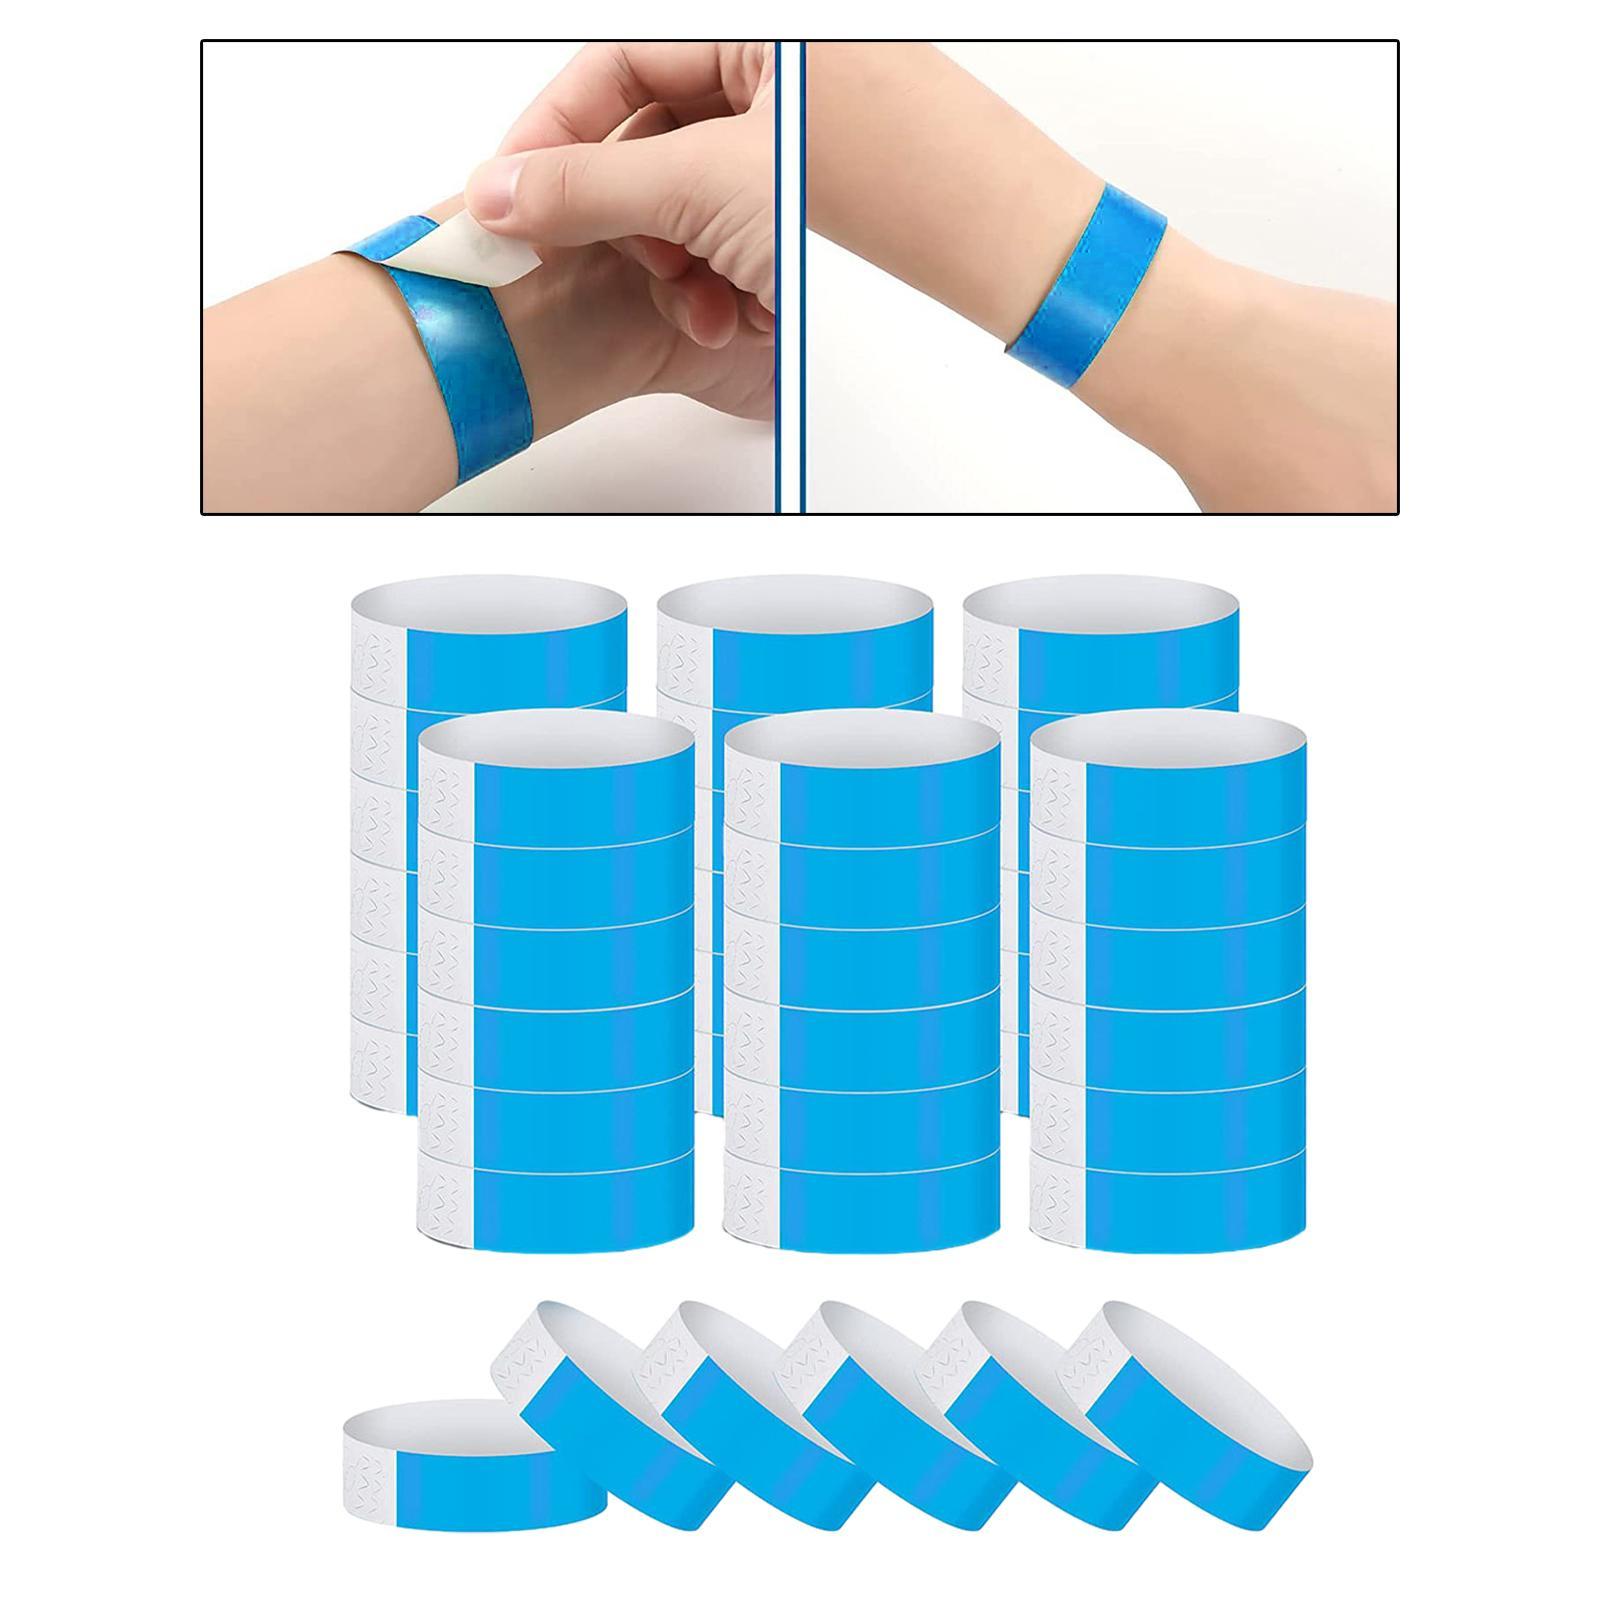 600x Neon Bands for Events Party Bands Adult Paper Bracelet Armbands Bands for Exhibitions Clubs Bars Events